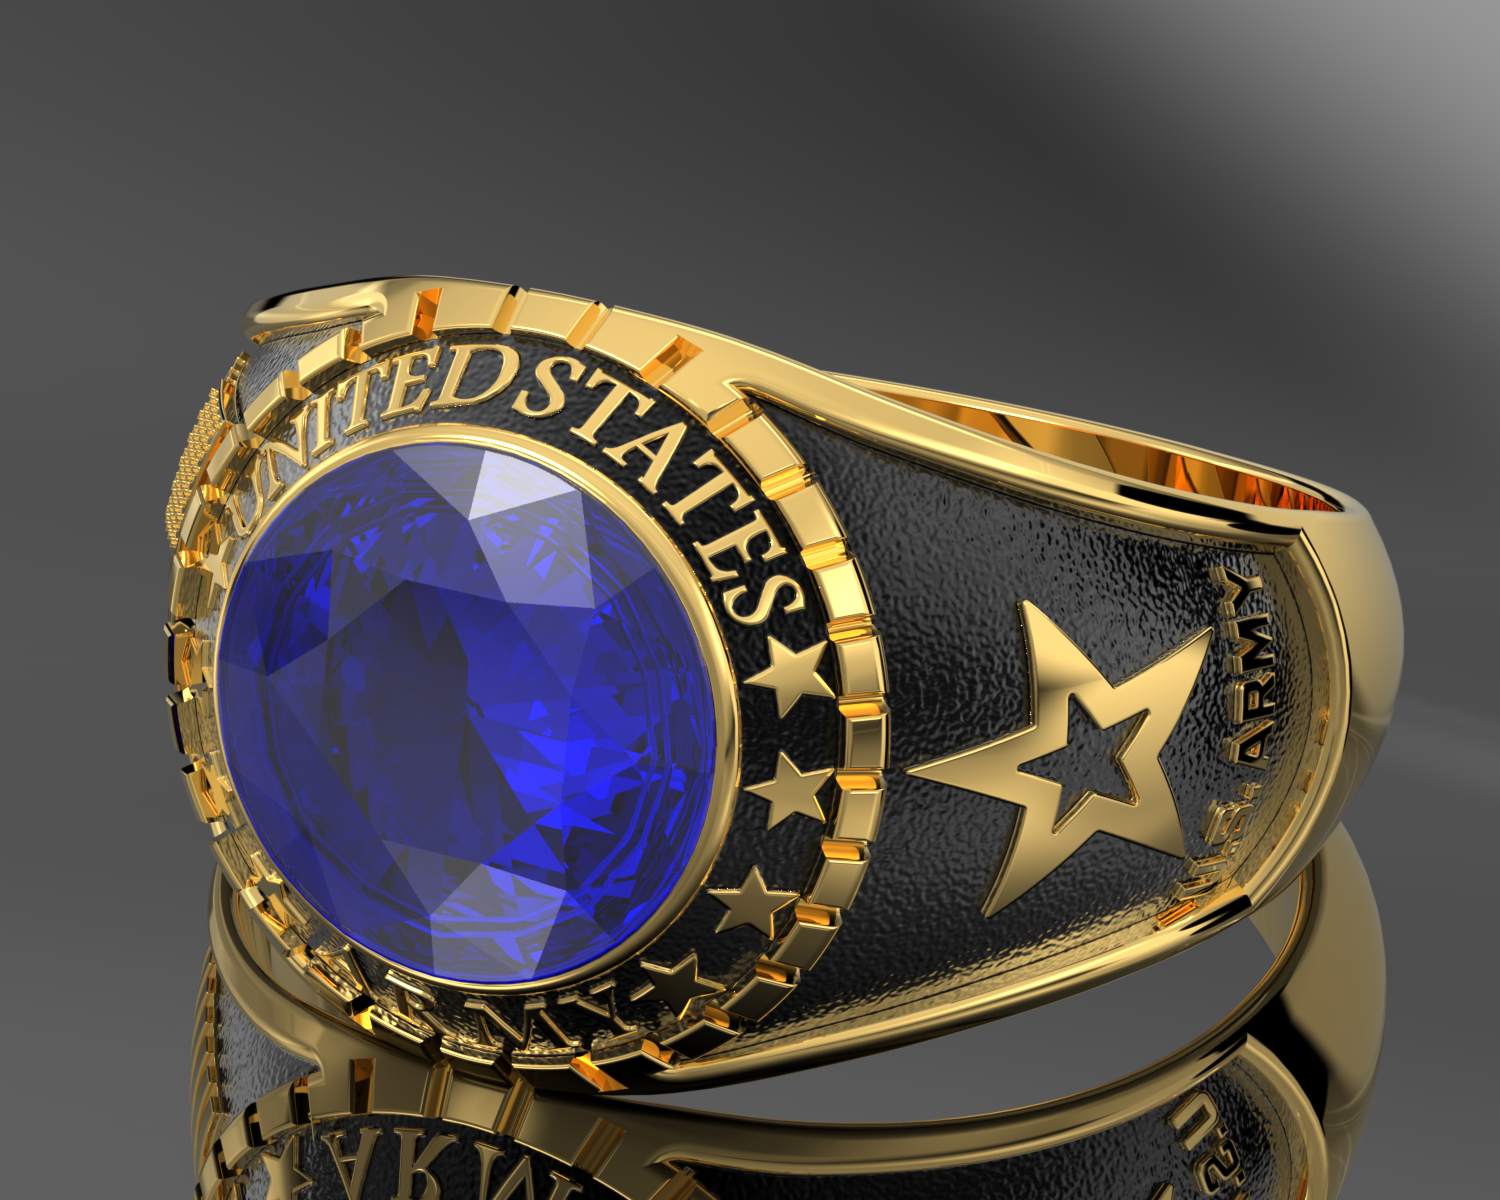 Mystery behind stolen Air Force ring closer to being solved | wzzm13.com